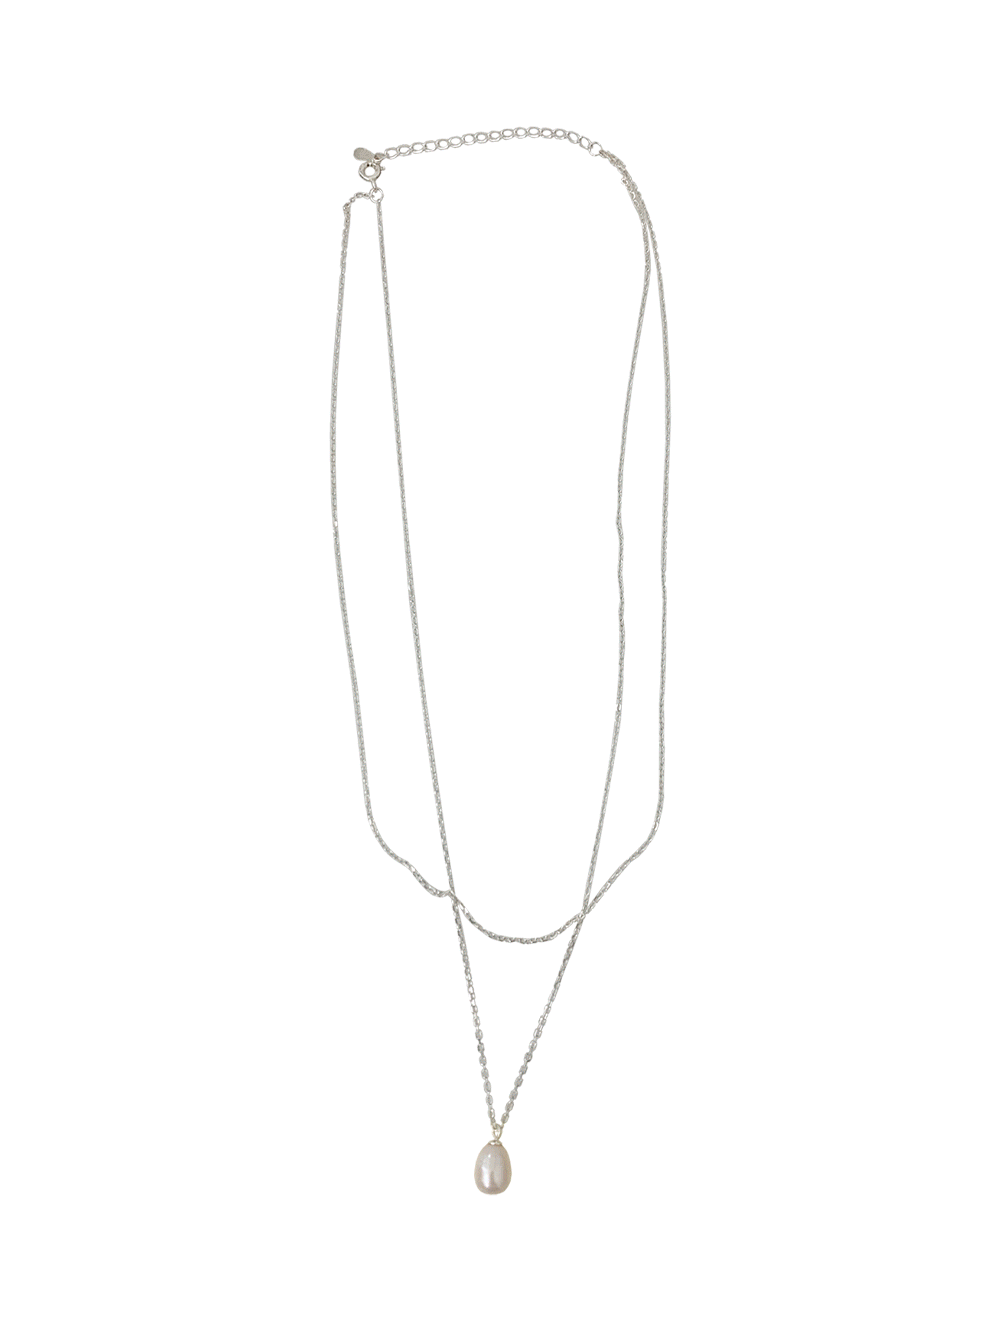 [silver 925] layered pearl - necklace